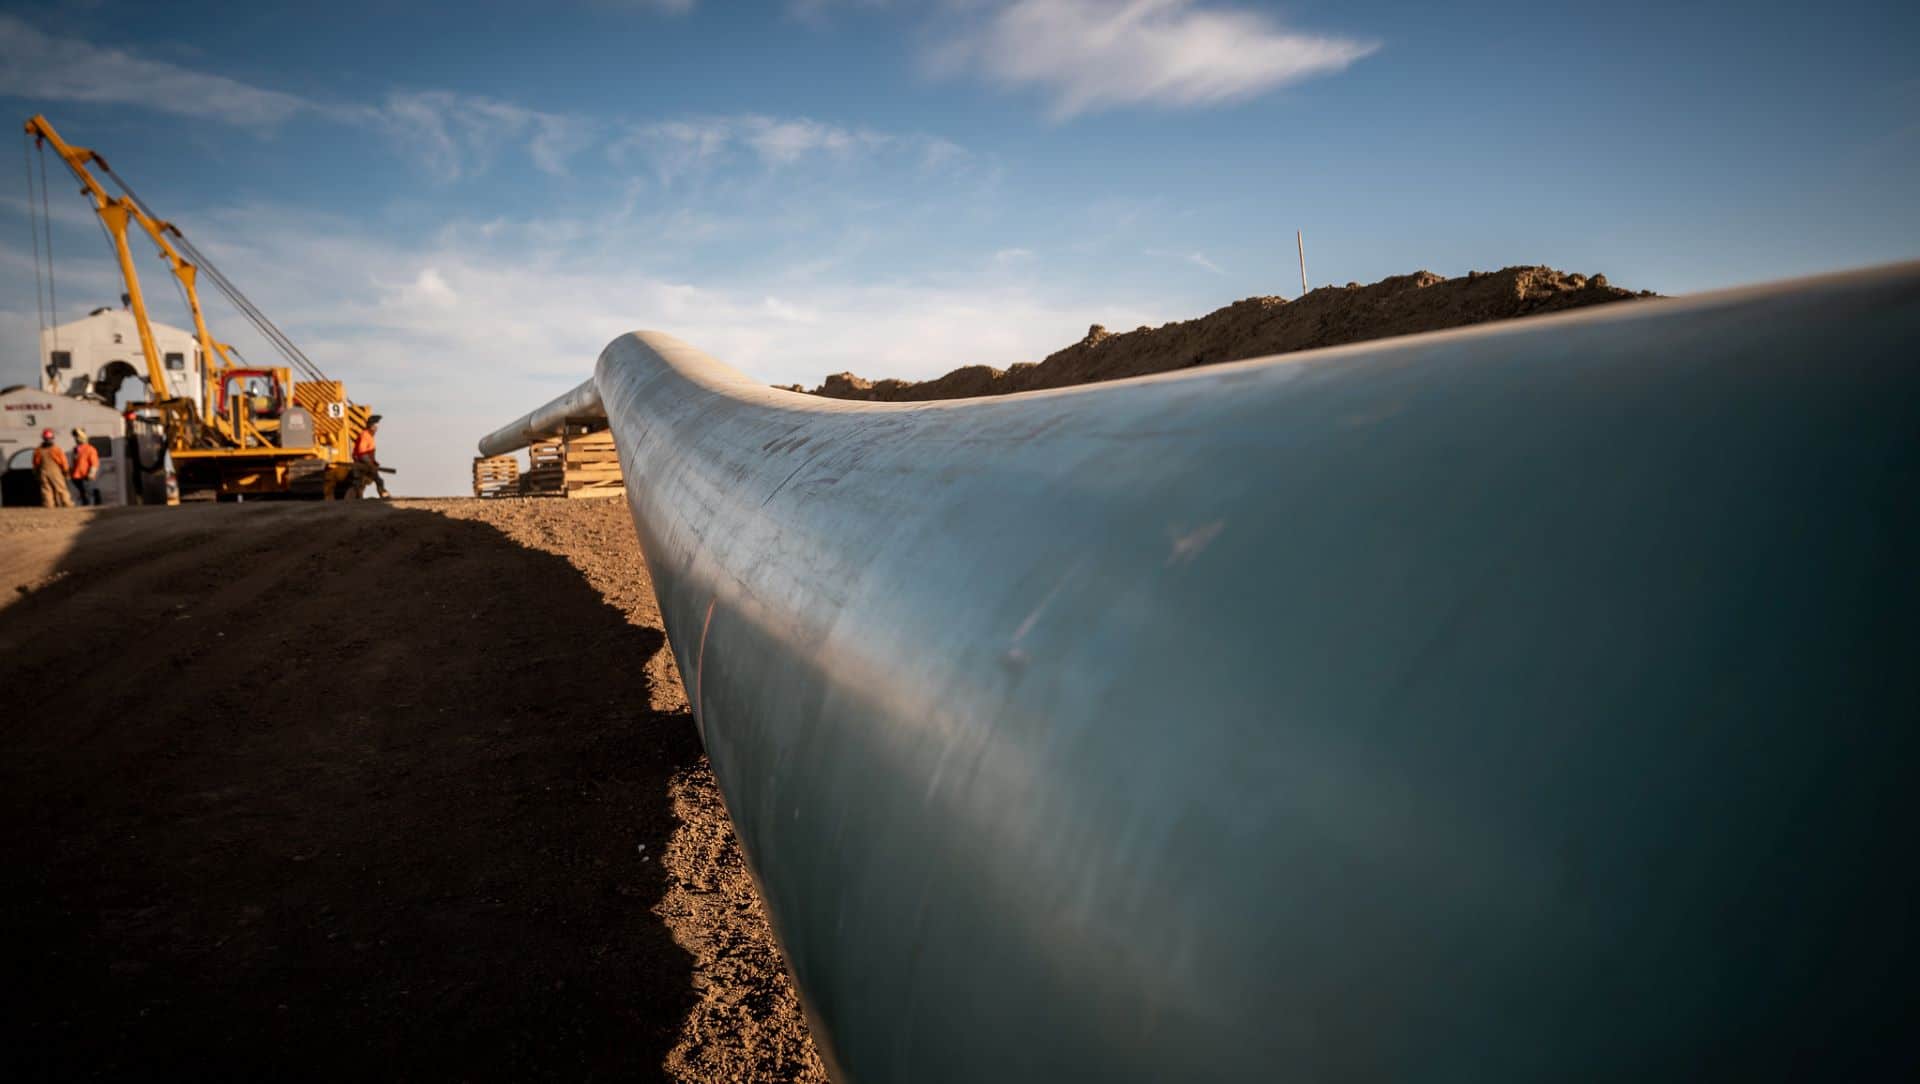 Prosecutors have challenged the cancellation of the Keystone XL pipeline